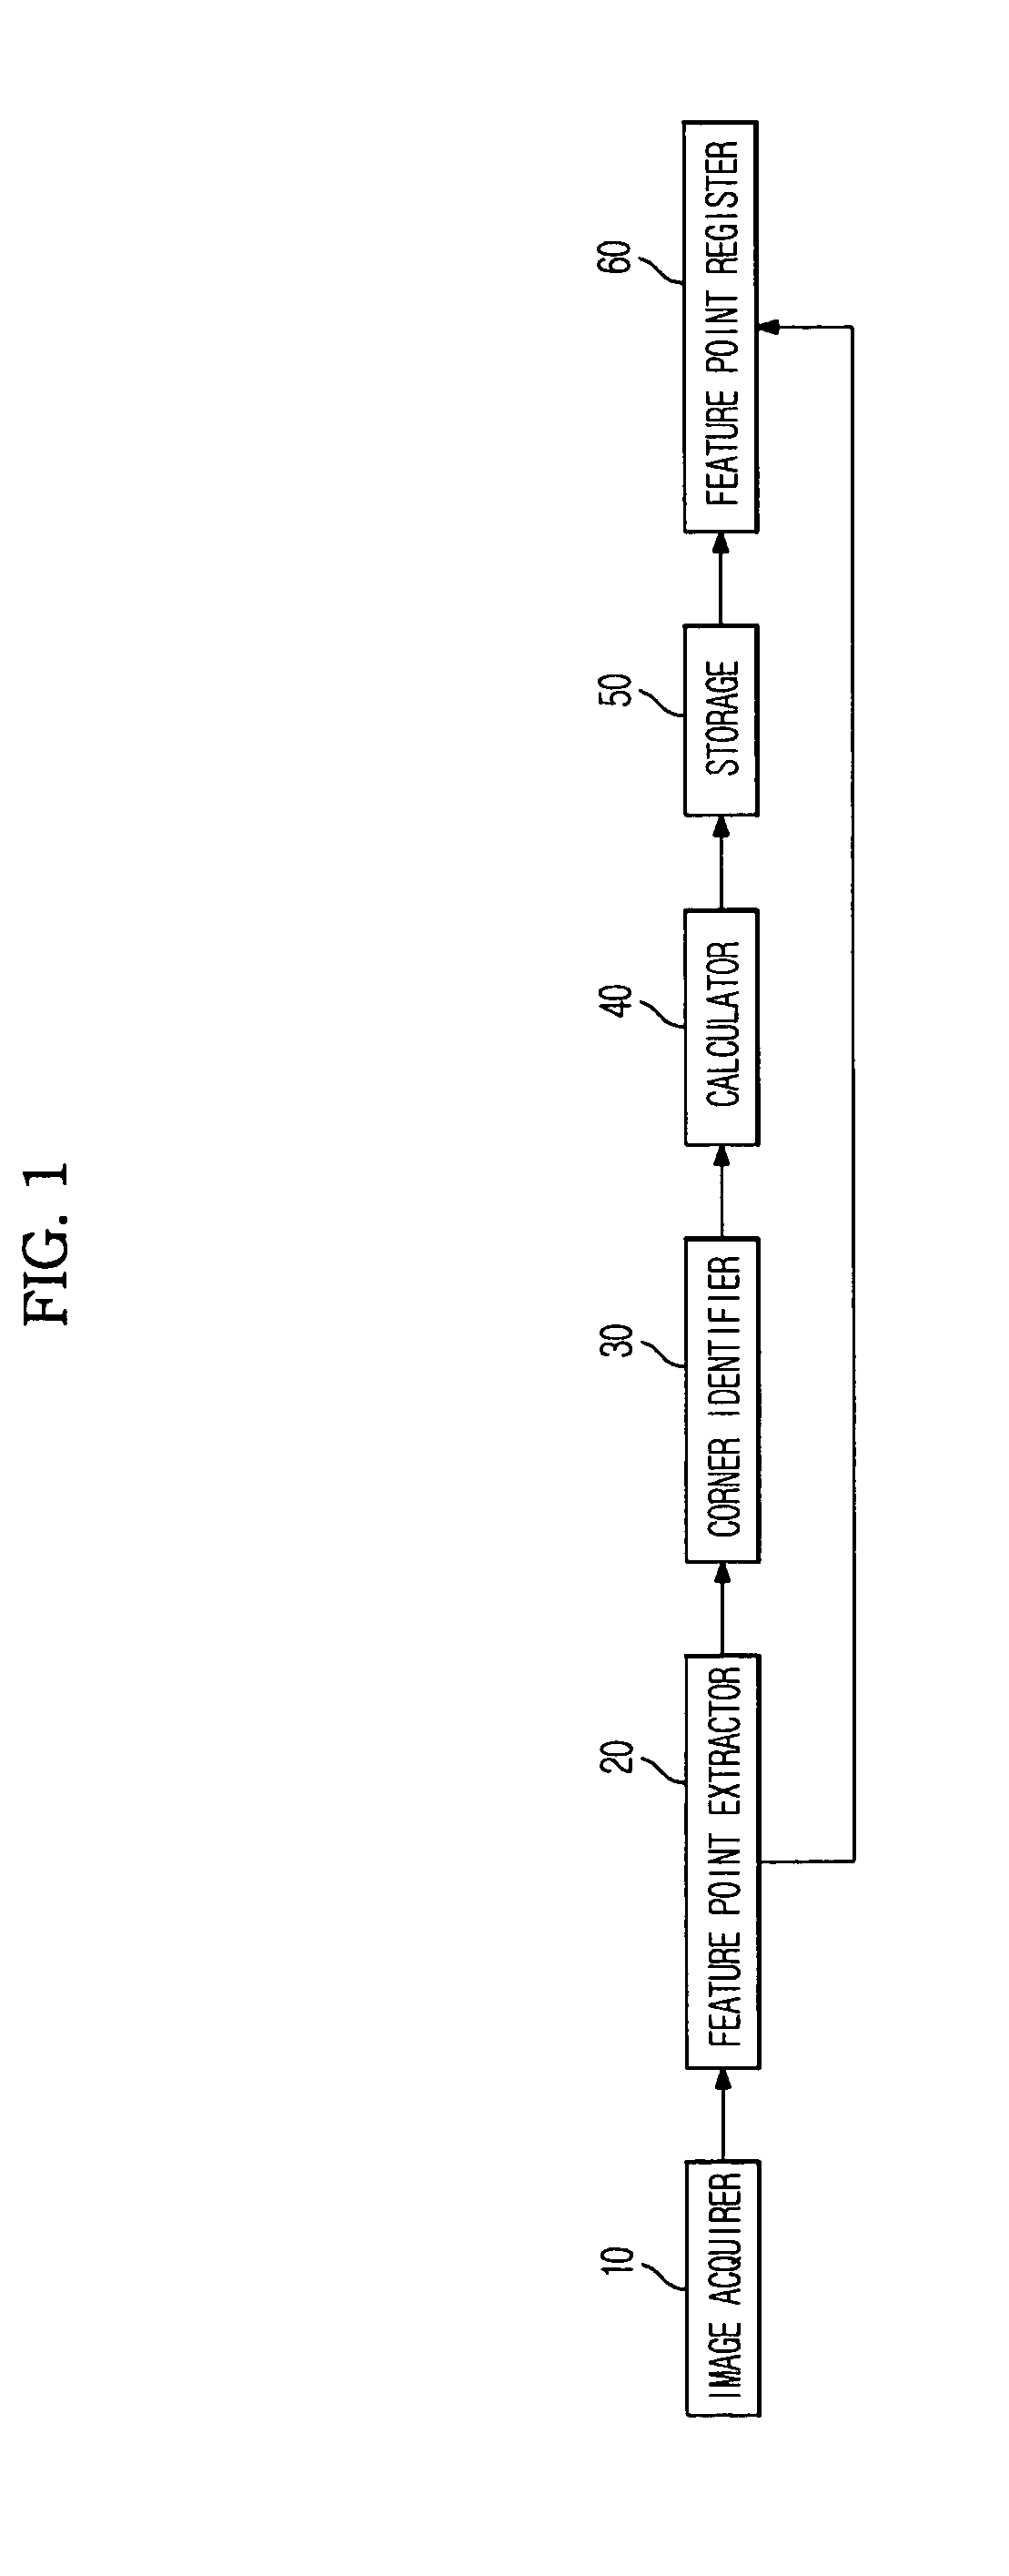 Image-based localization feature point registration apparatus, method and computer-readable medium